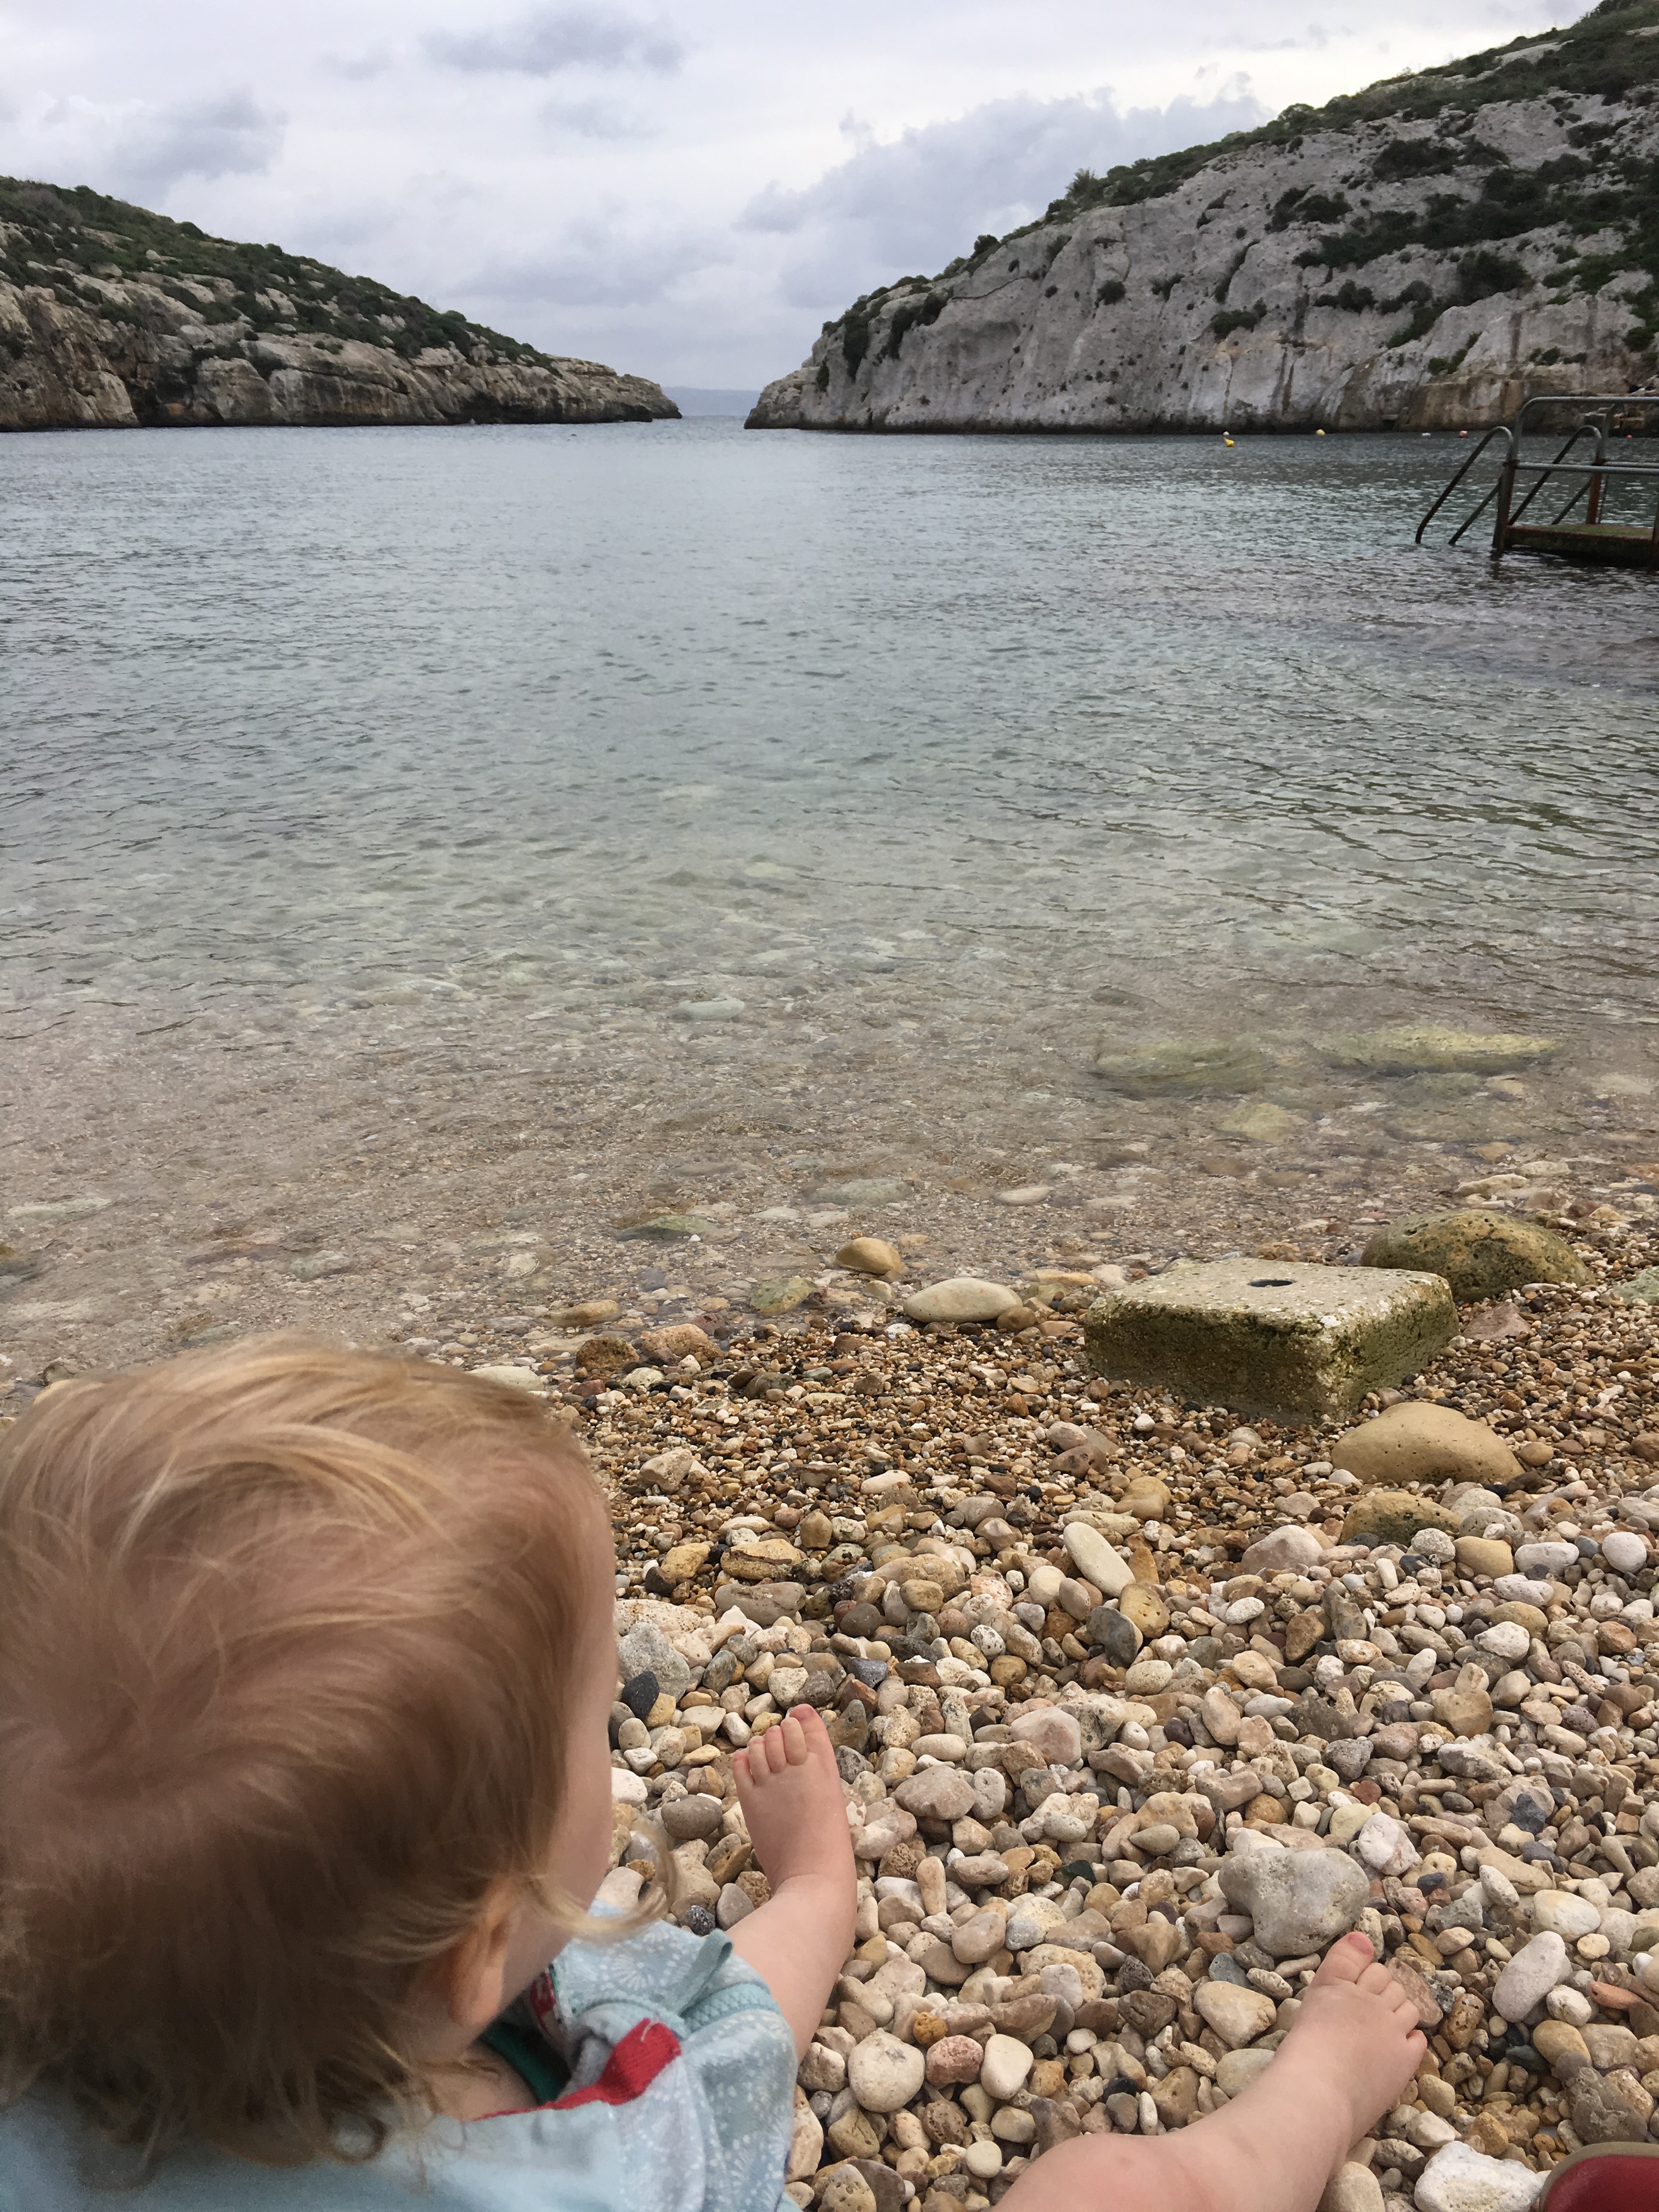 A blonde baby sits on a pebbly beach, looking out over a bay with crystal clear water